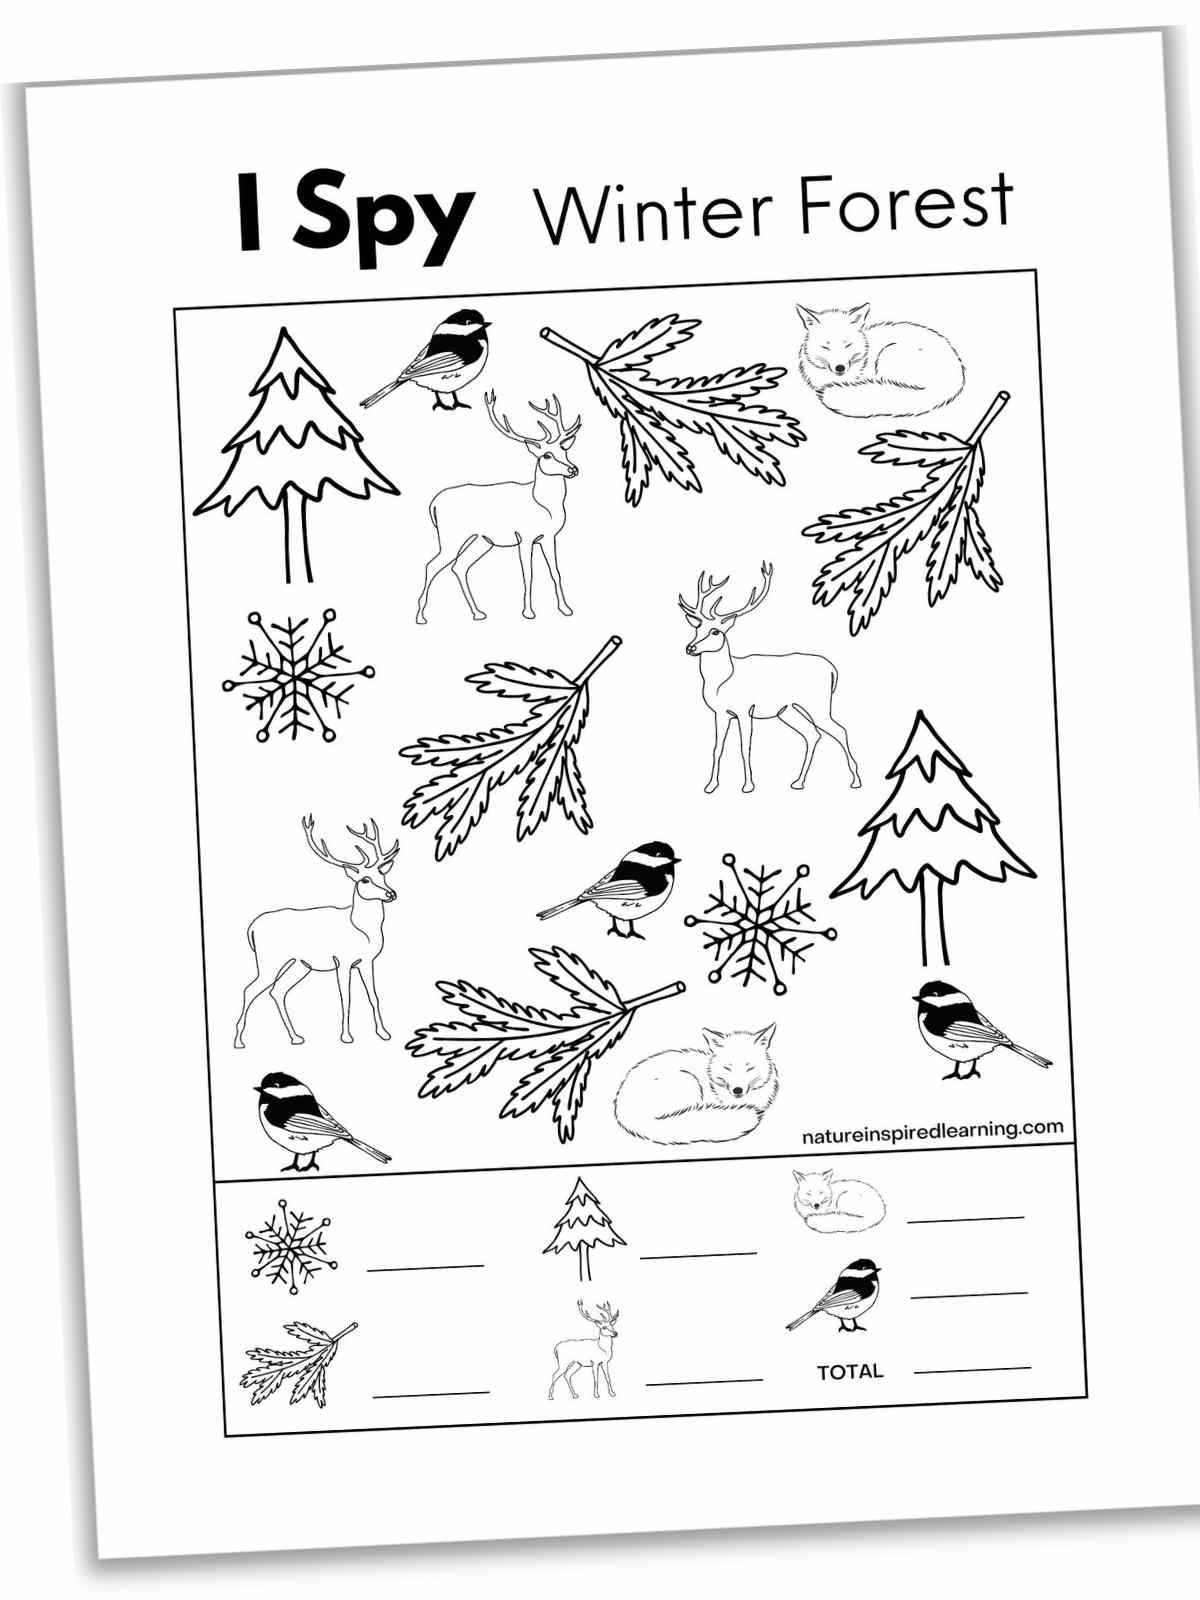 Black and white winter I spy printable with forest animals including a fox, chickadee, and a deer. Key at the bottom.